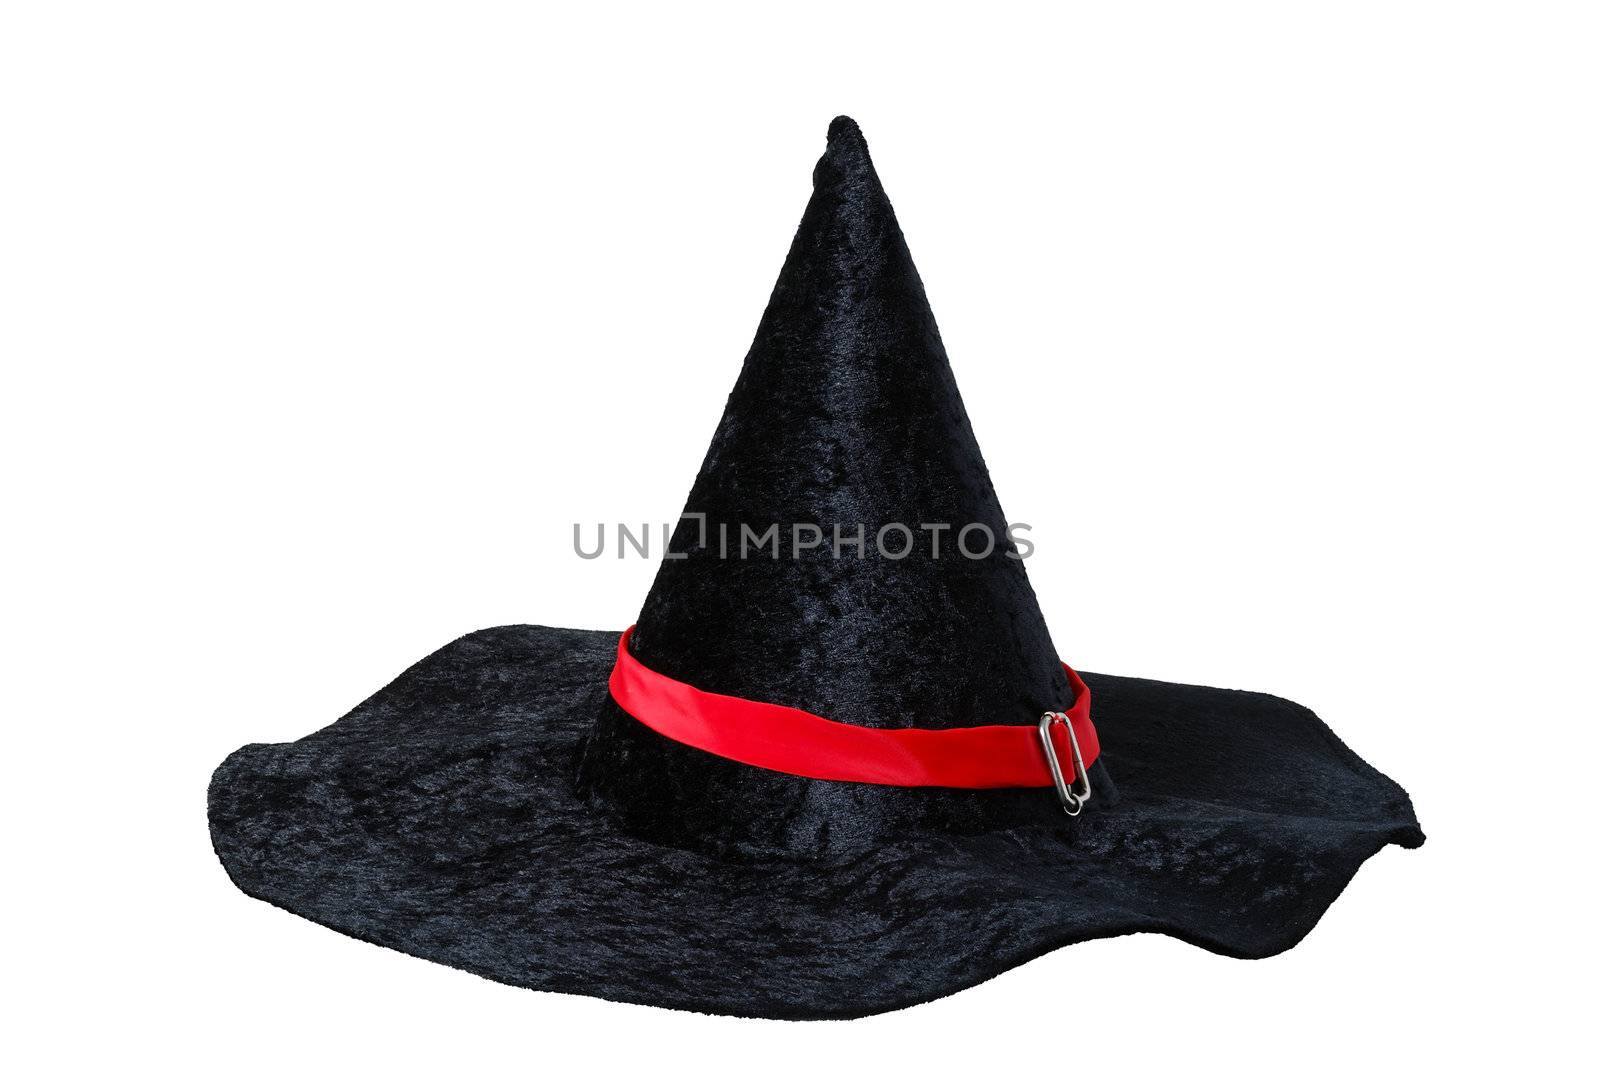 Black cone hat with red strip isolated on white background